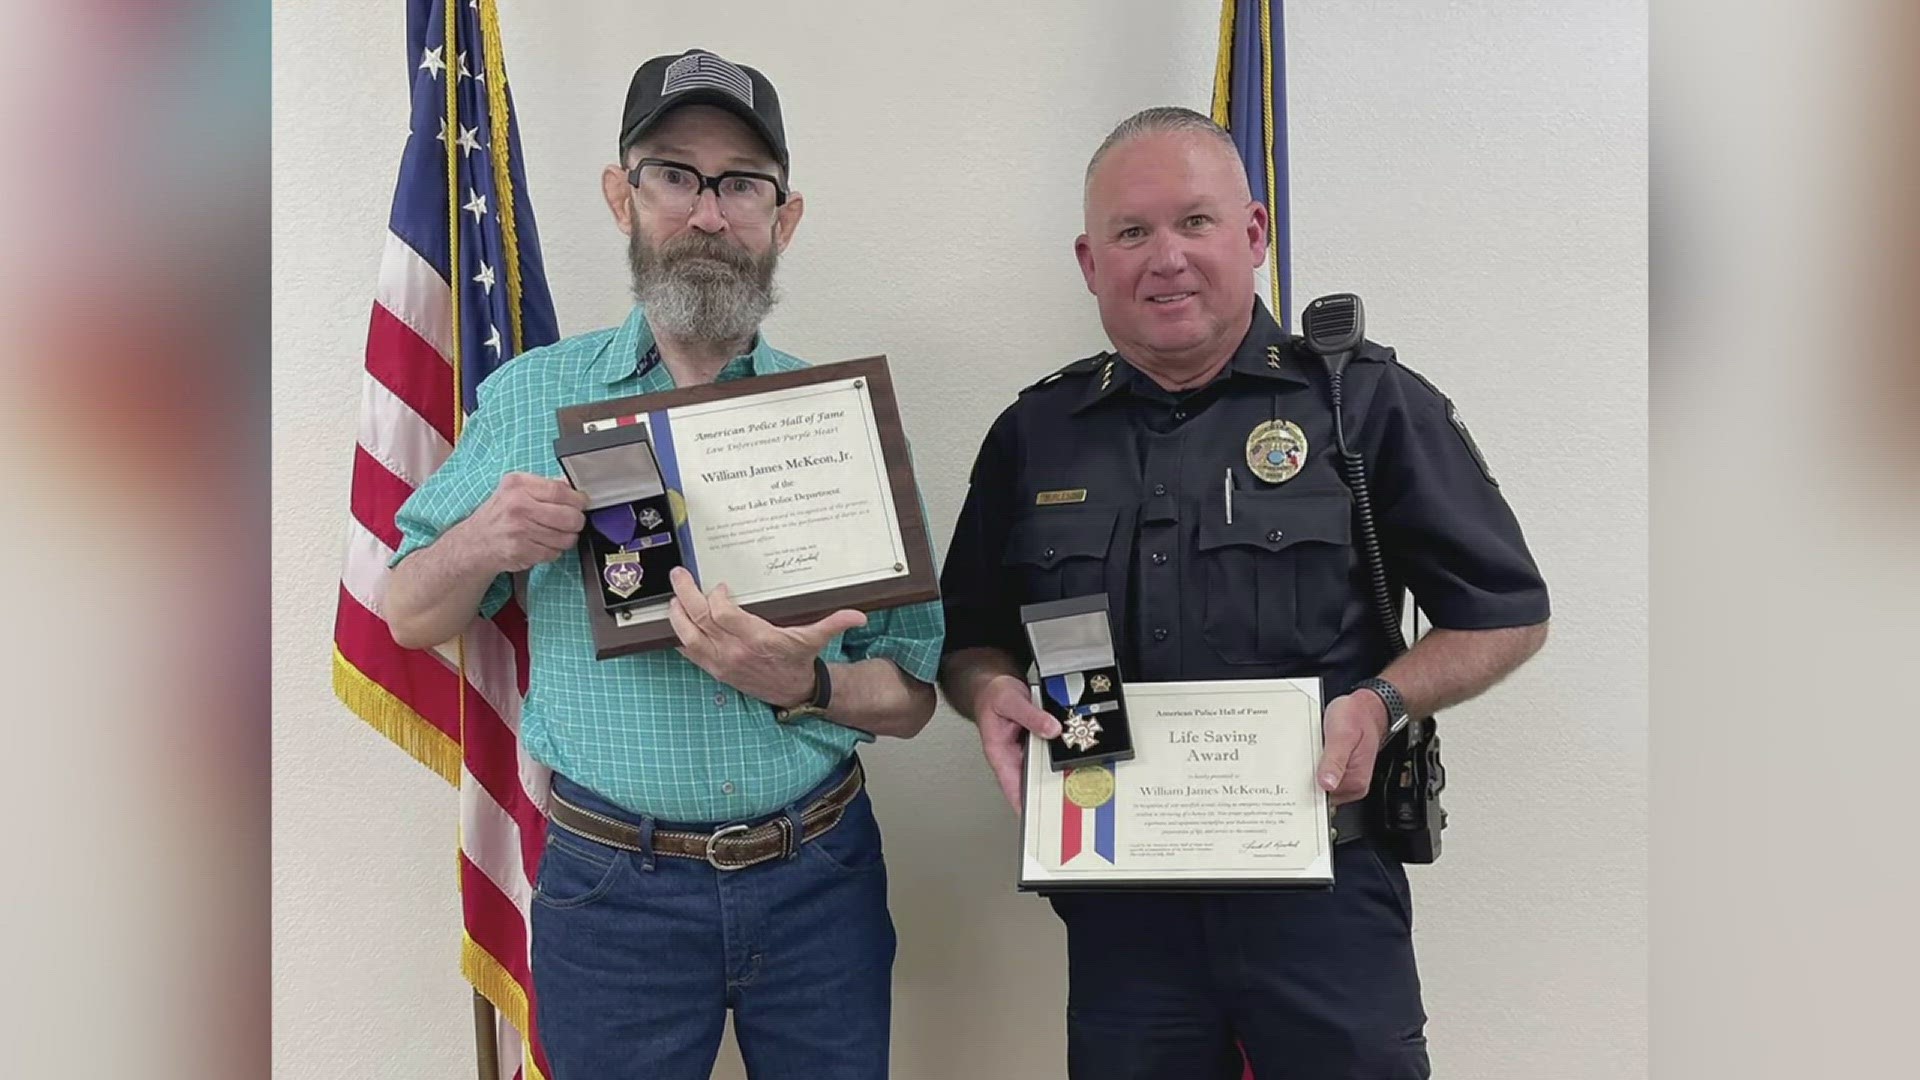 Retired Sour Lake Police Officer William “Bill” McKeon was awarded a life saving award for saving an infant's life.